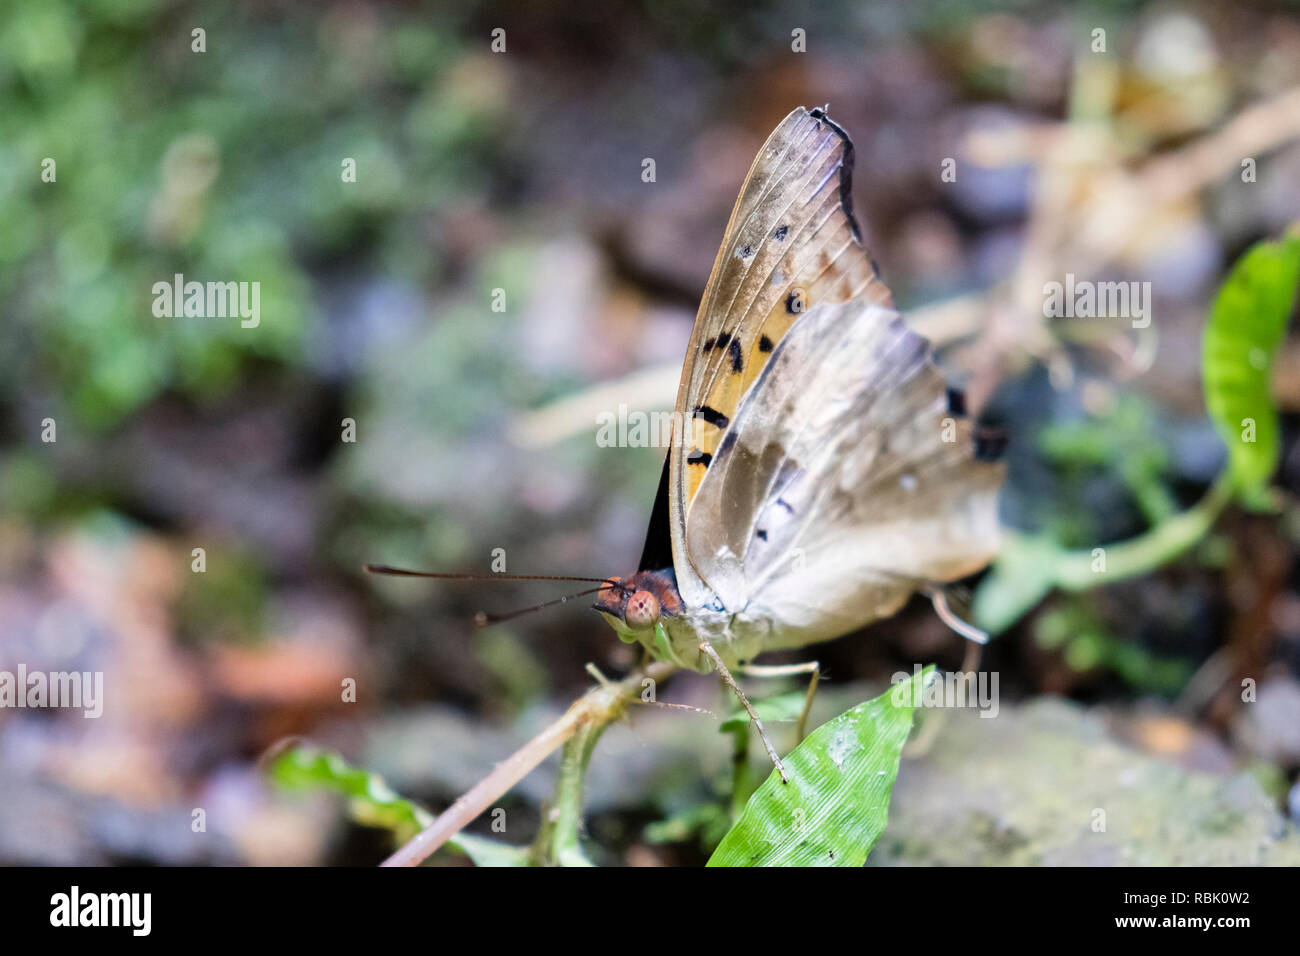 An iridescent blue butterfly (wings closed) in the Costa Rican Rain forest Stock Photo